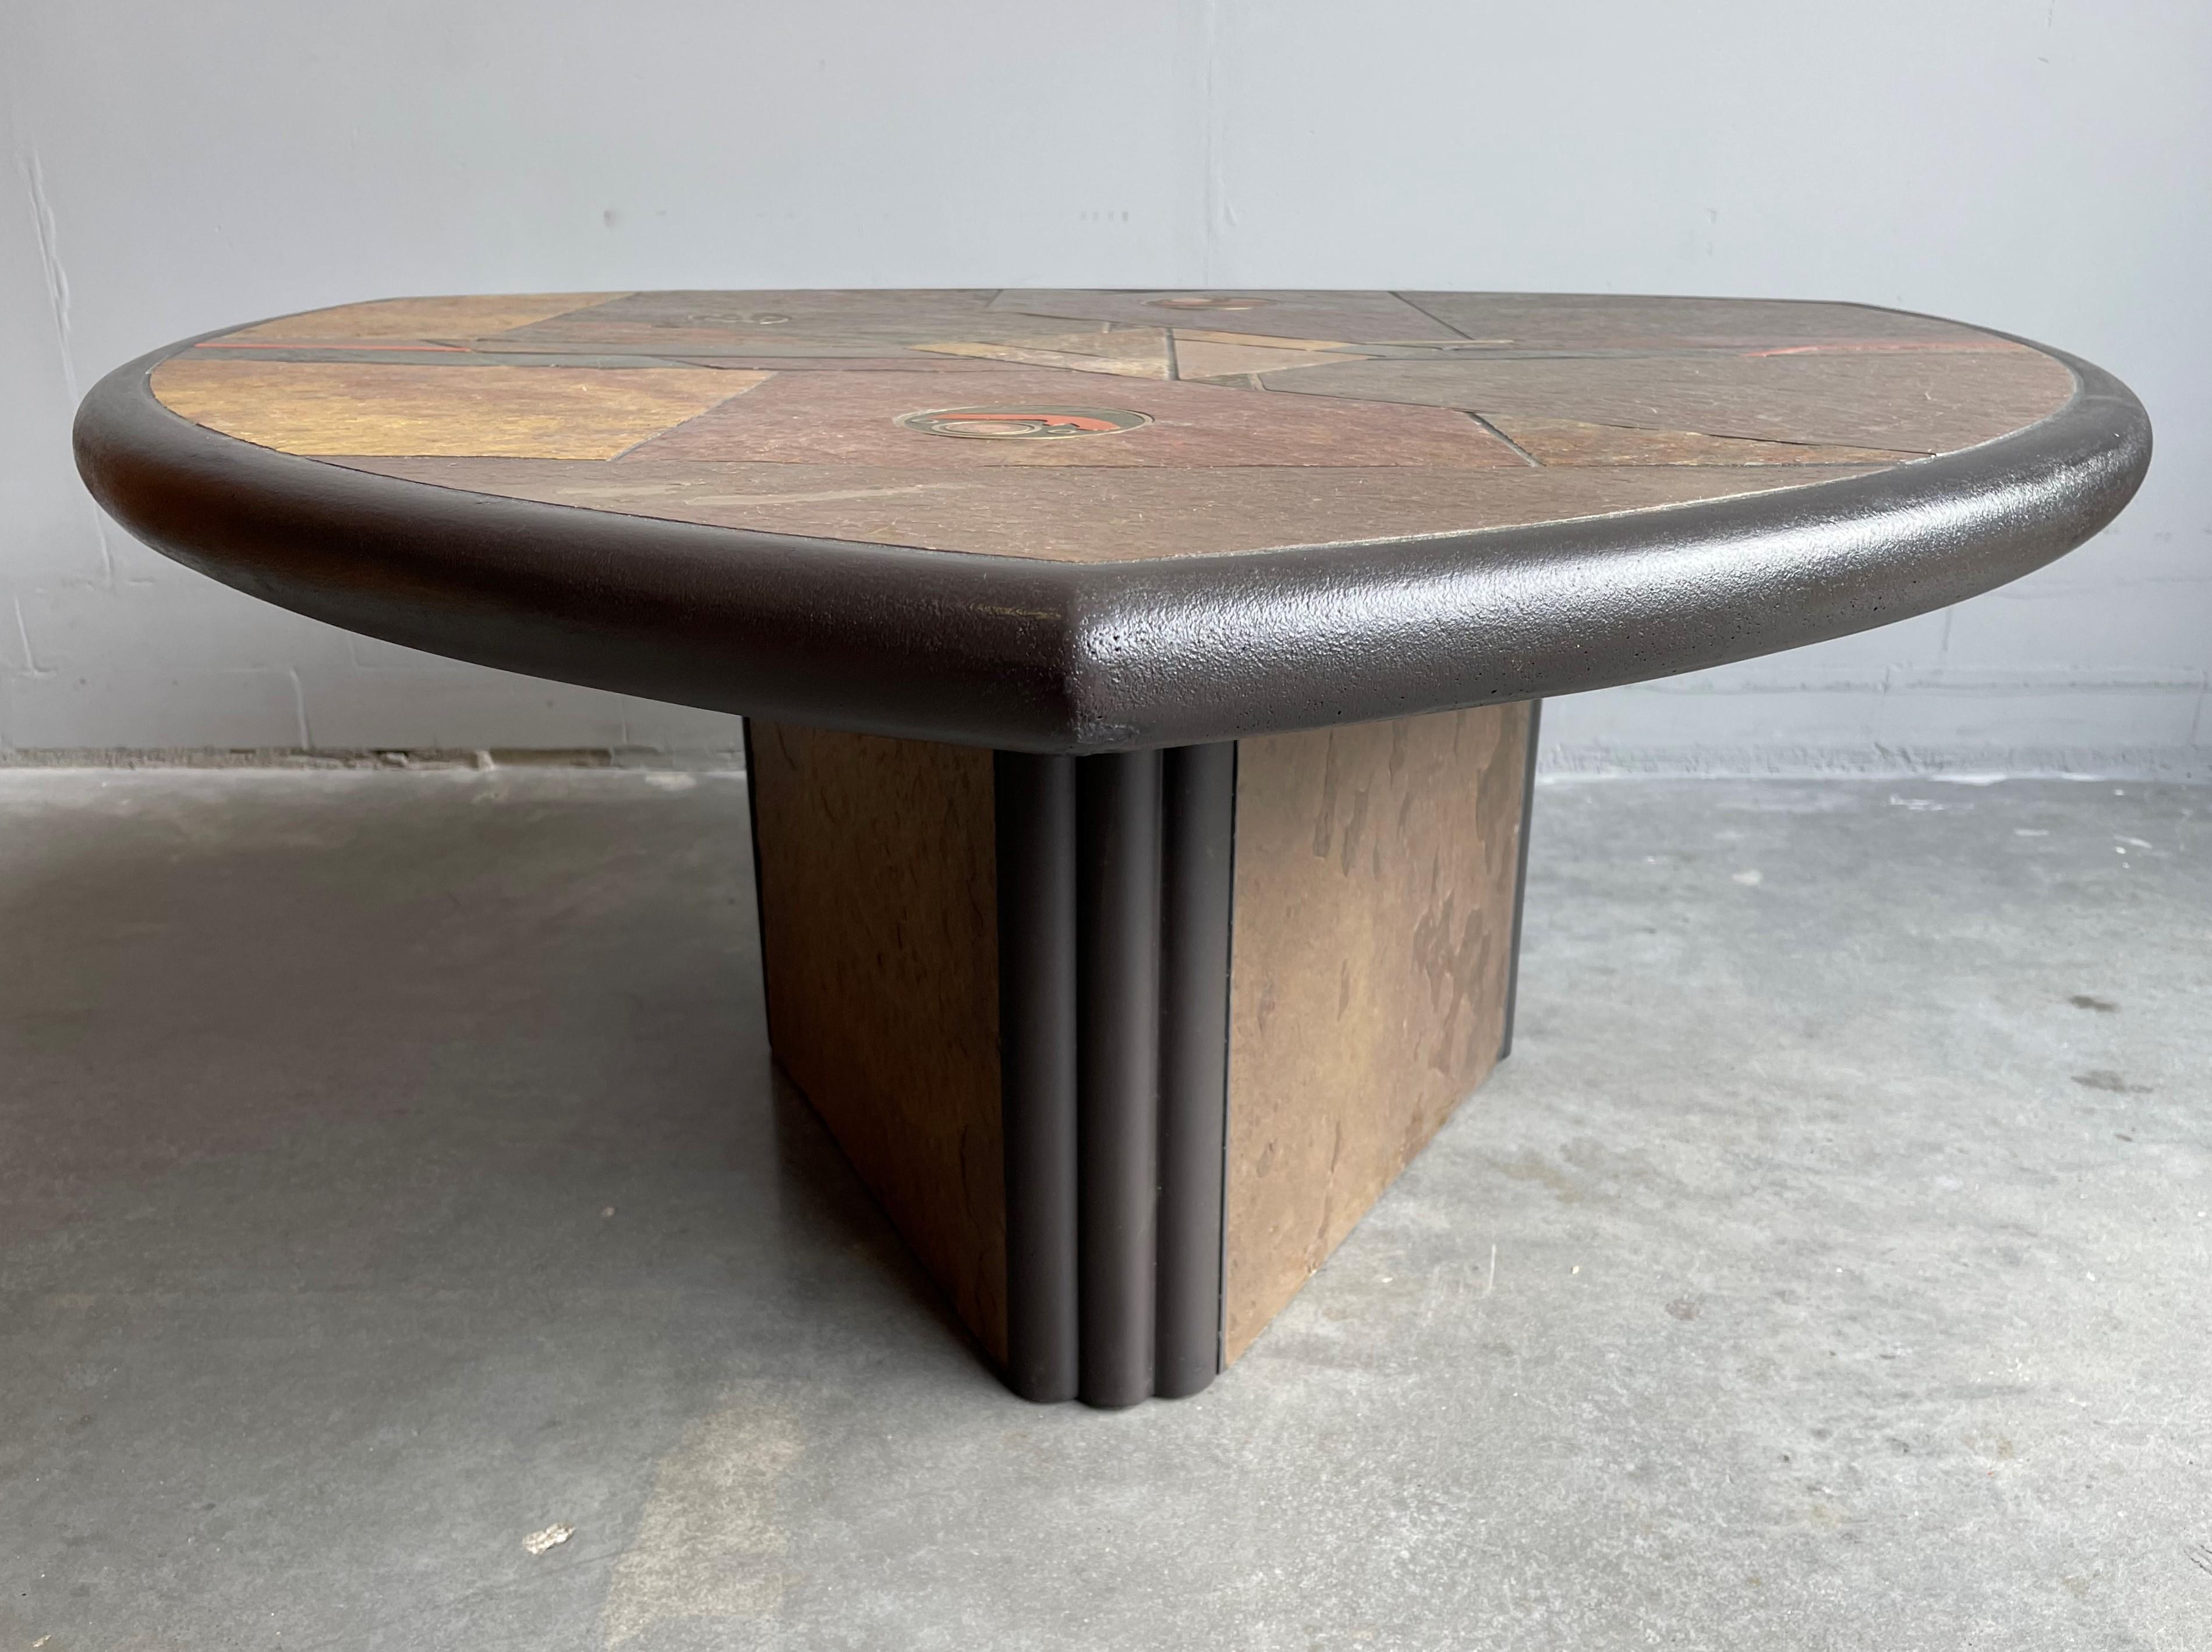 Hand-Crafted Unique Midcentury Modern Paul Kingma Brutalist Slate & Inlaid Brass Coffee Table